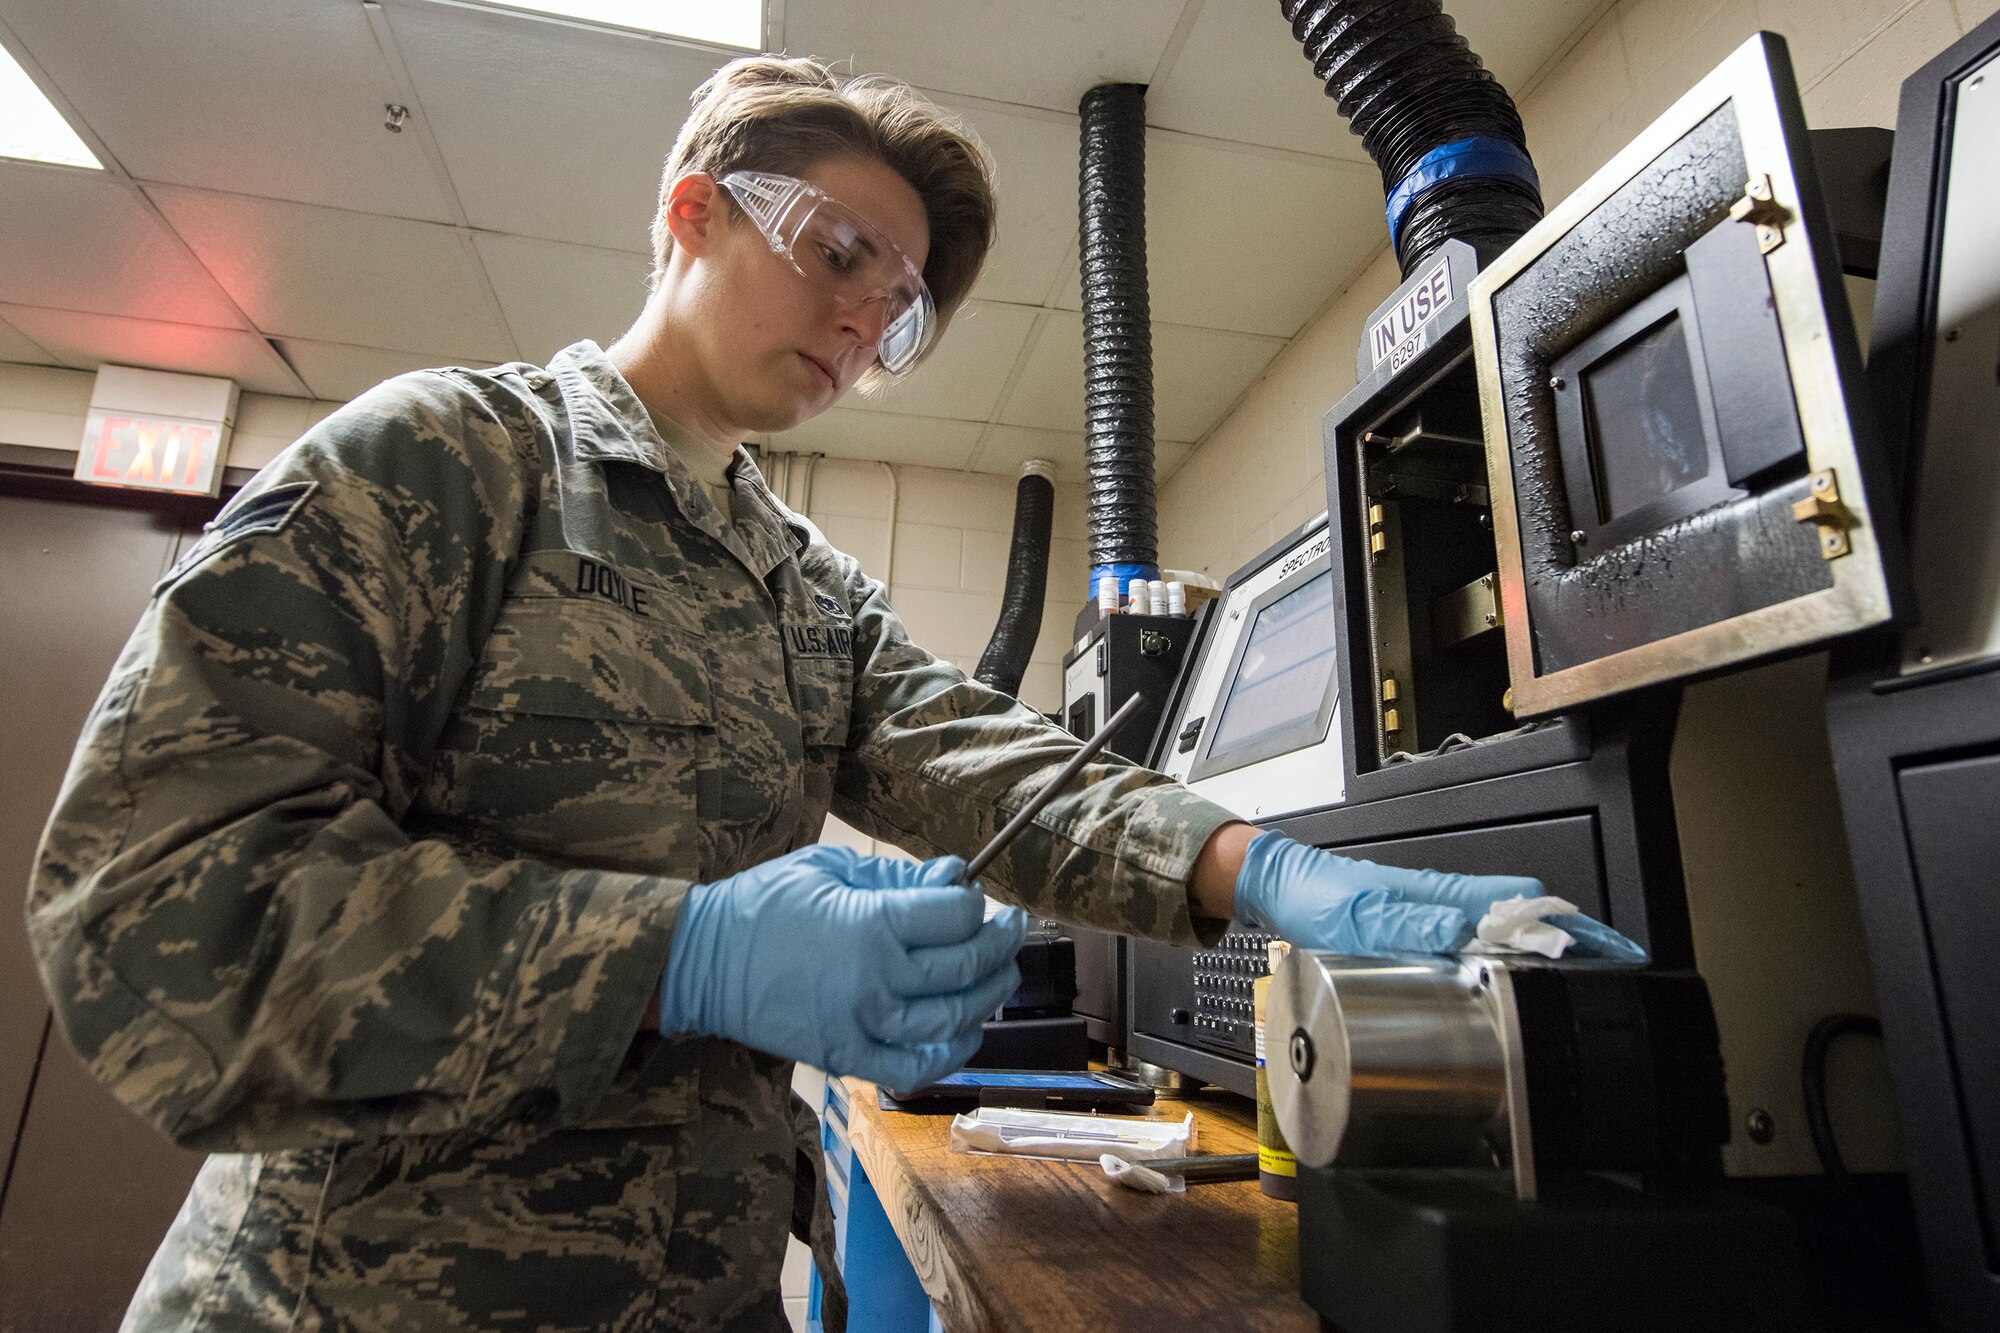 Senior Airman Louisa Doyle, 23d Maintenance Squadron non-destructive inspection (NDI) specialist, examines a steel rod, May 2, 2018, at Moody Air Force Base, Ga. NDI technicians use various methods to complete these inspections such as X-ray, florescent dye penetrant, oil analysis and ultrasonic scanning to examine and inspect numerous aircraft parts and components to ensure that they are in usable condition. (U.S. Air Force photo by Airman 1st Class Eugene Oliver)